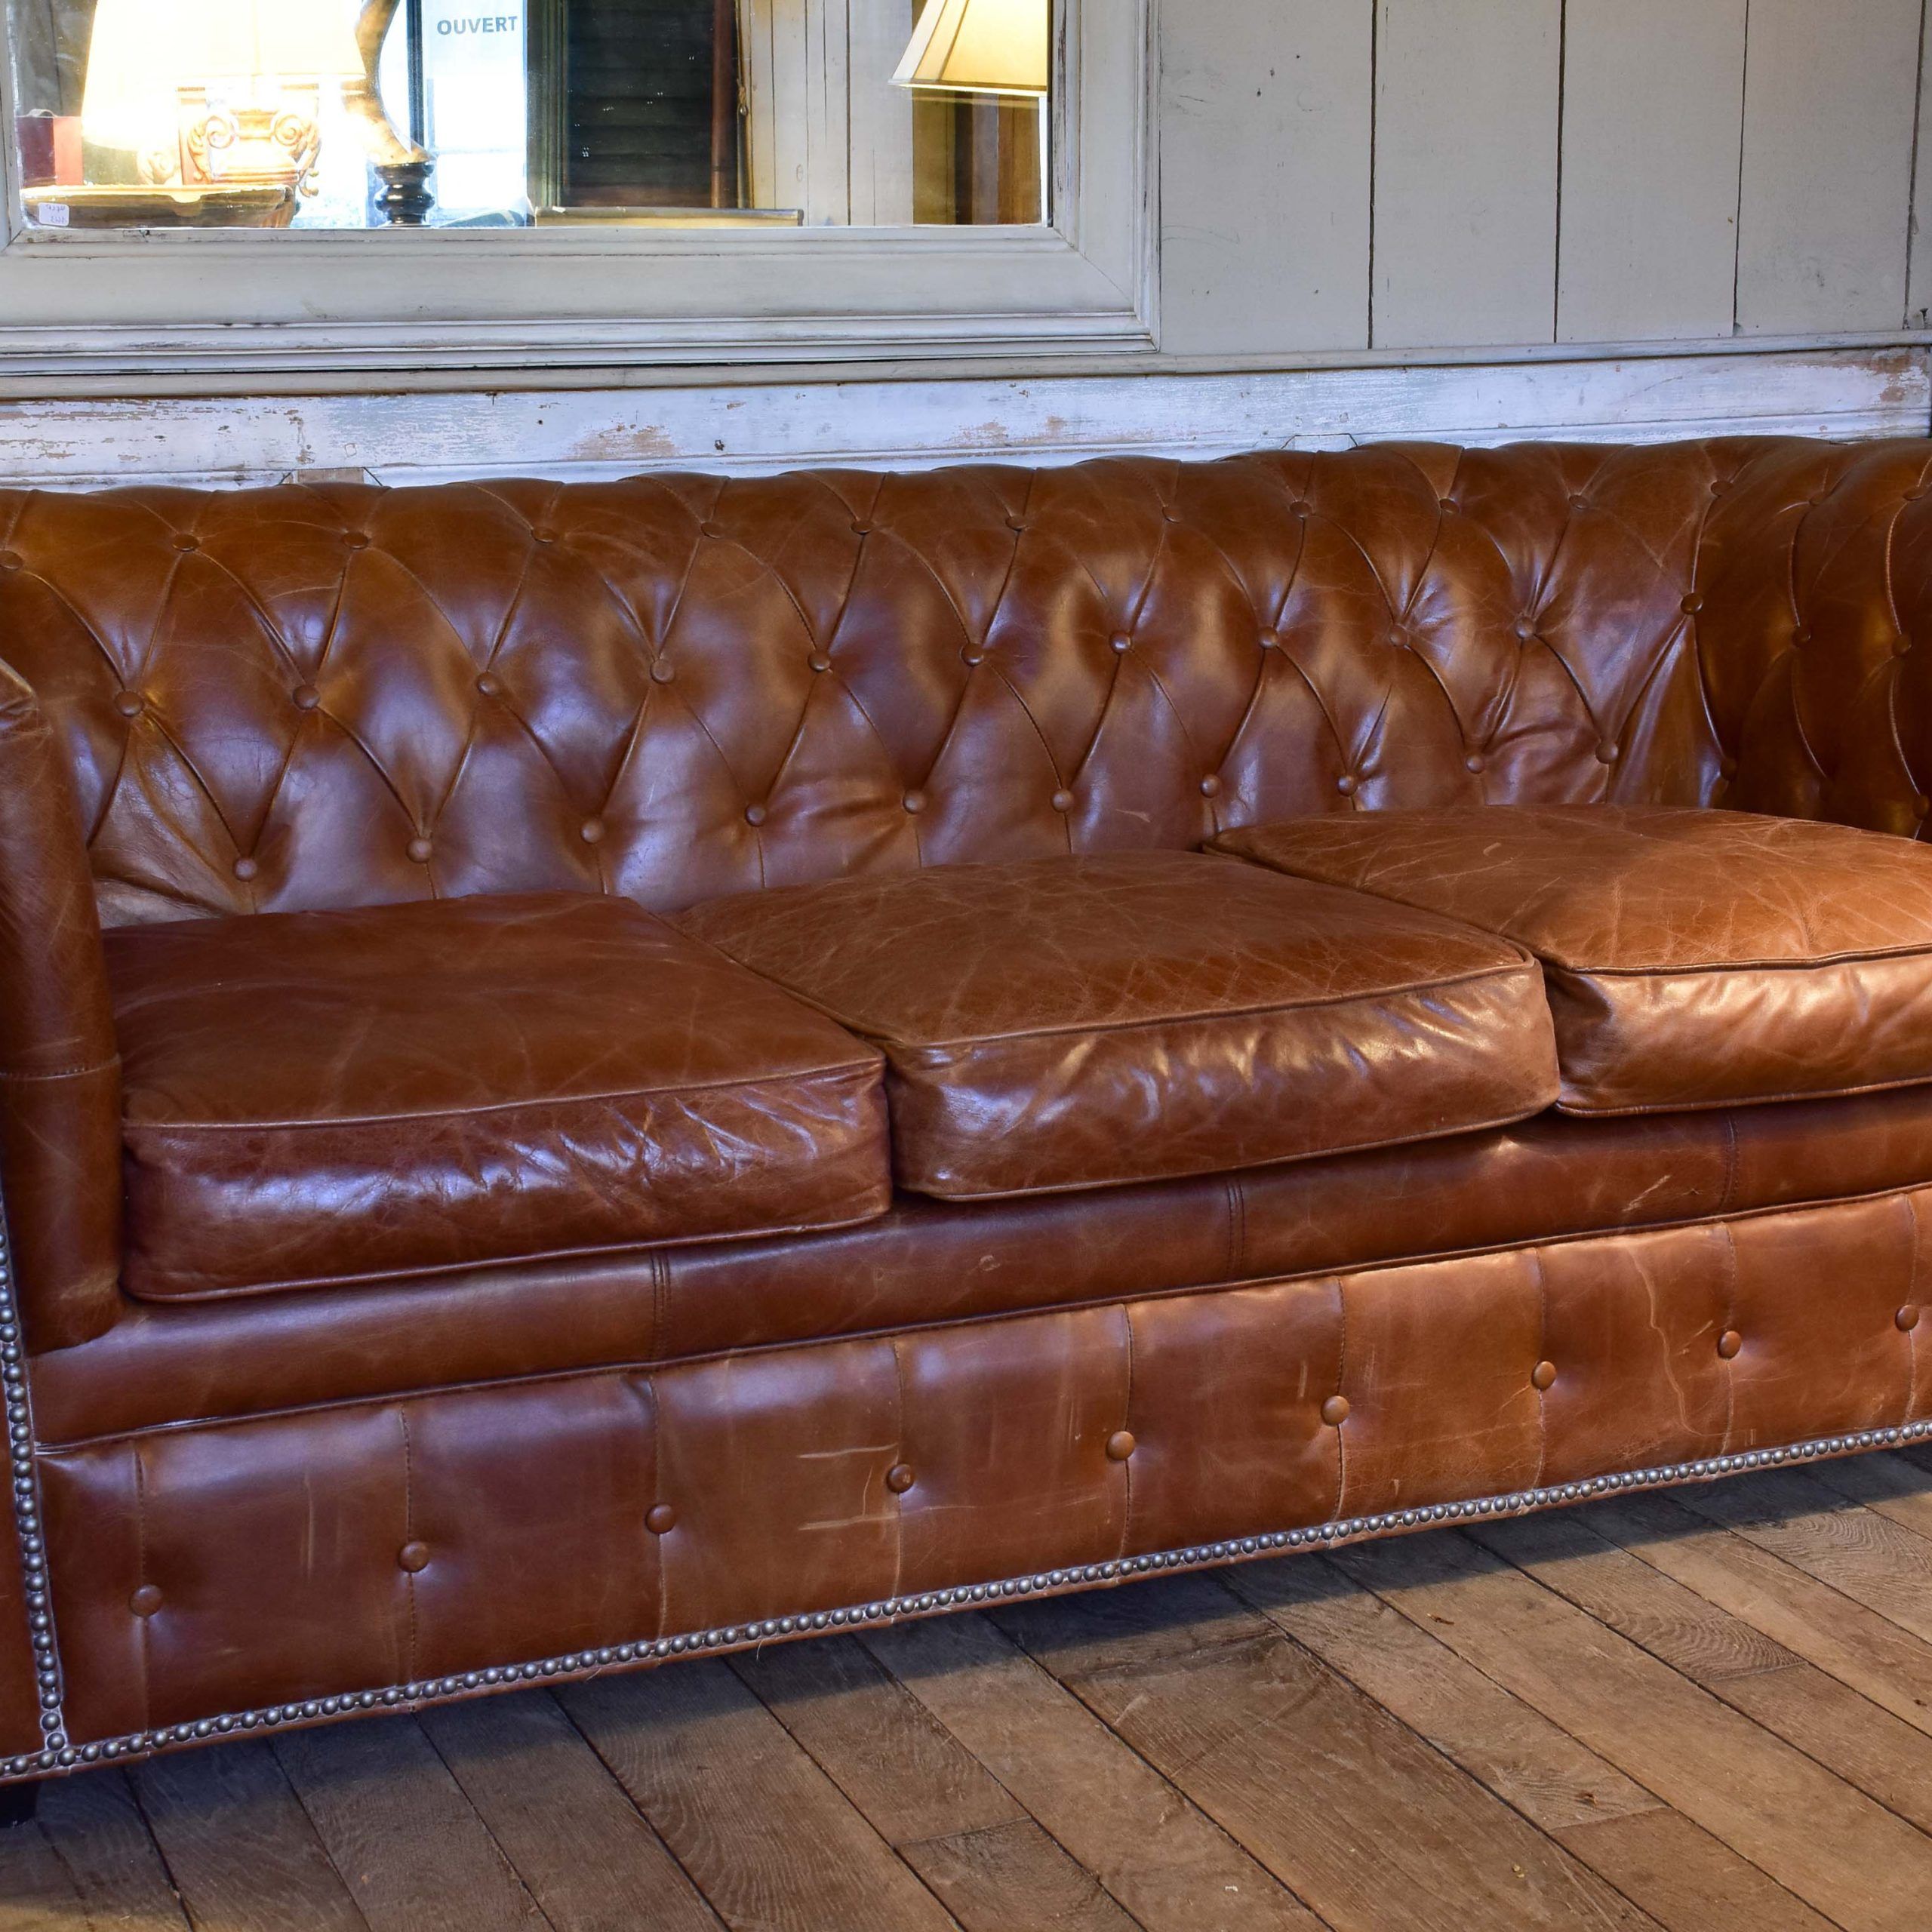 Leather Chesterfield Three Seat Sofa From The 1940’s – Chez Pluie Intended For Chesterfield Sofas (View 16 of 20)